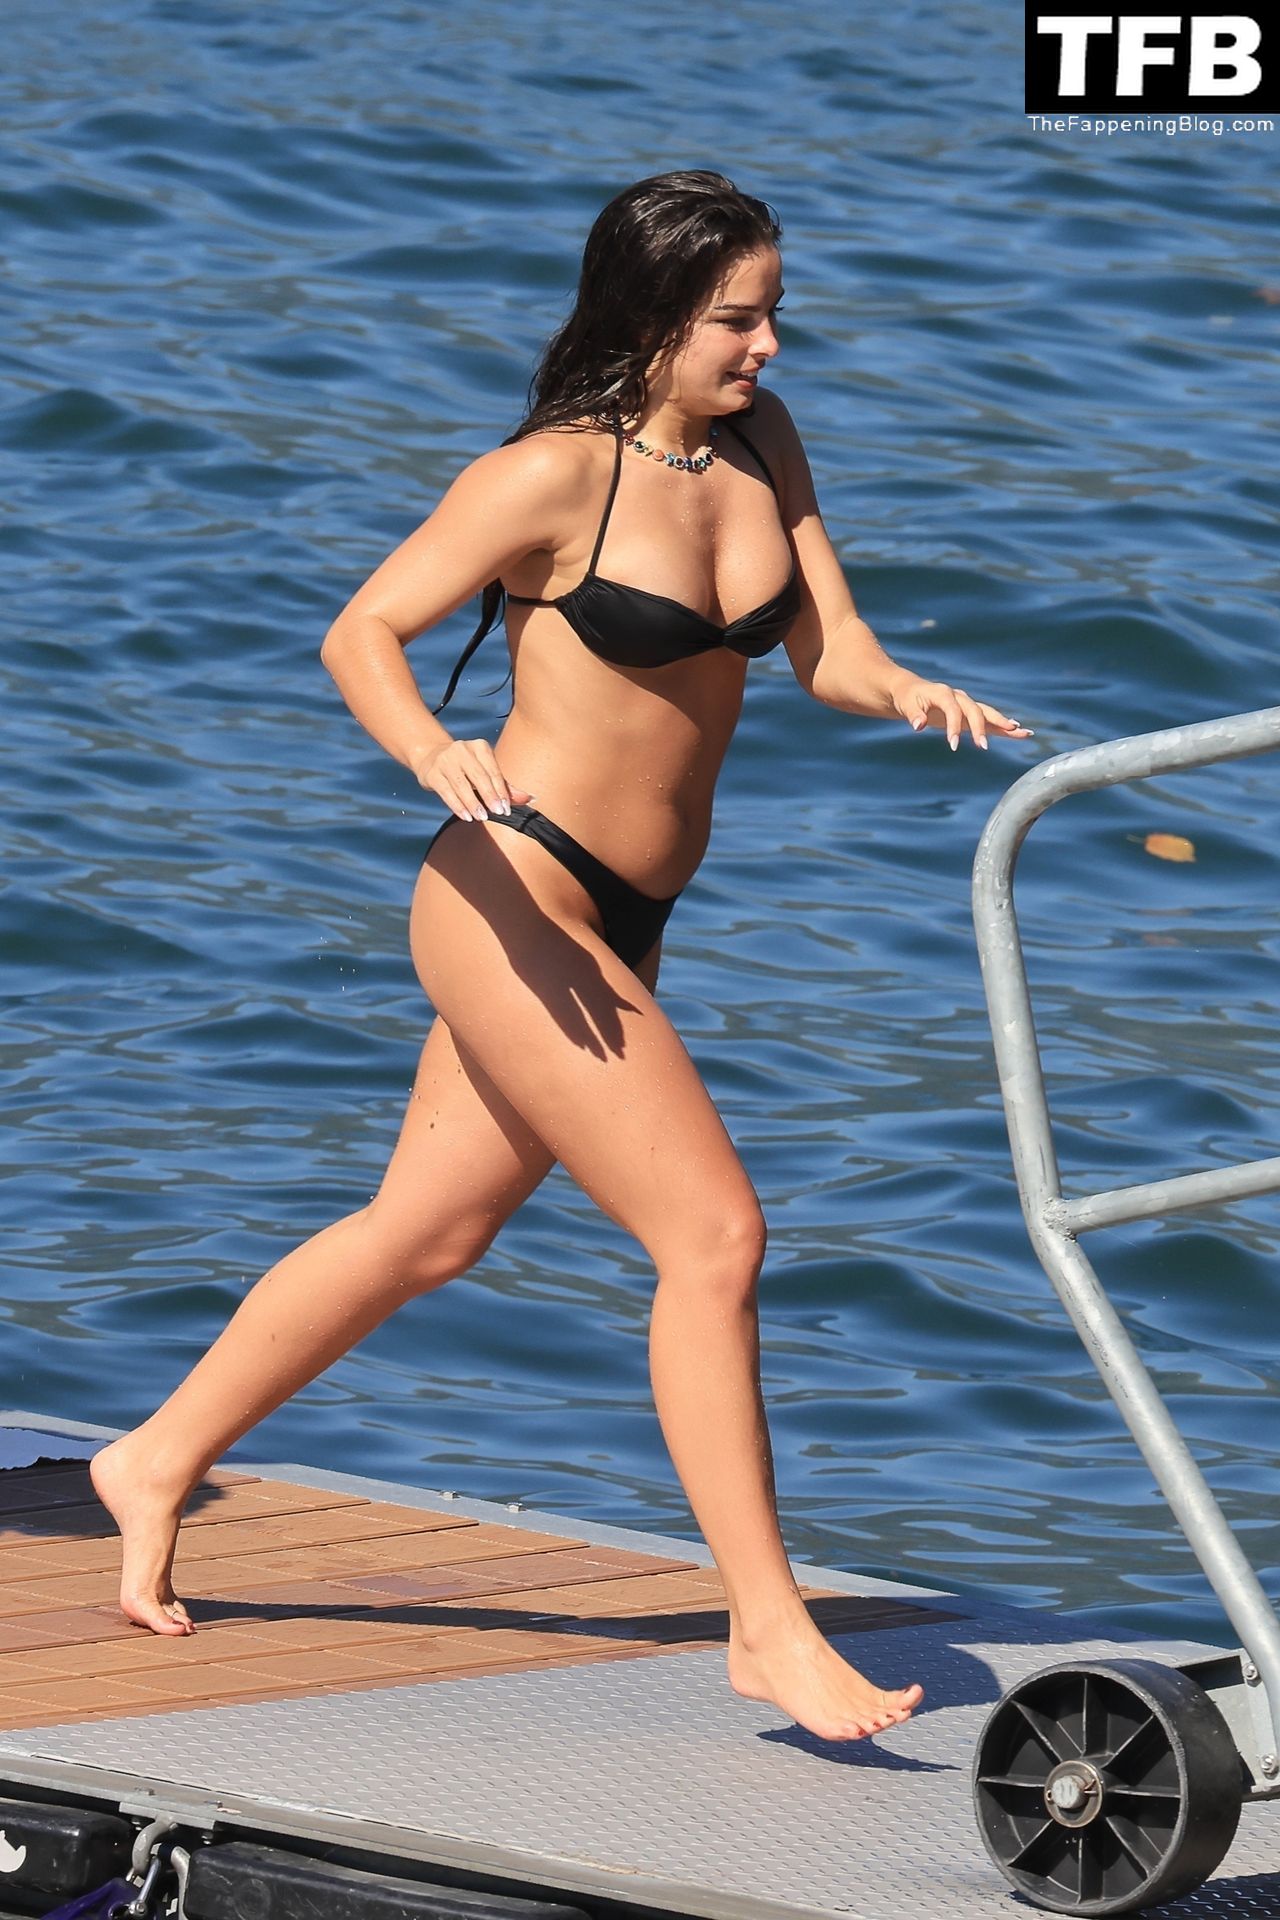 Addison Rae Sexy The Fappening Blog 45 - Addison Rae Displays Her Curves in a Black Bikini on Holiday with Omer Fedi on Lake Como (70 Photos)